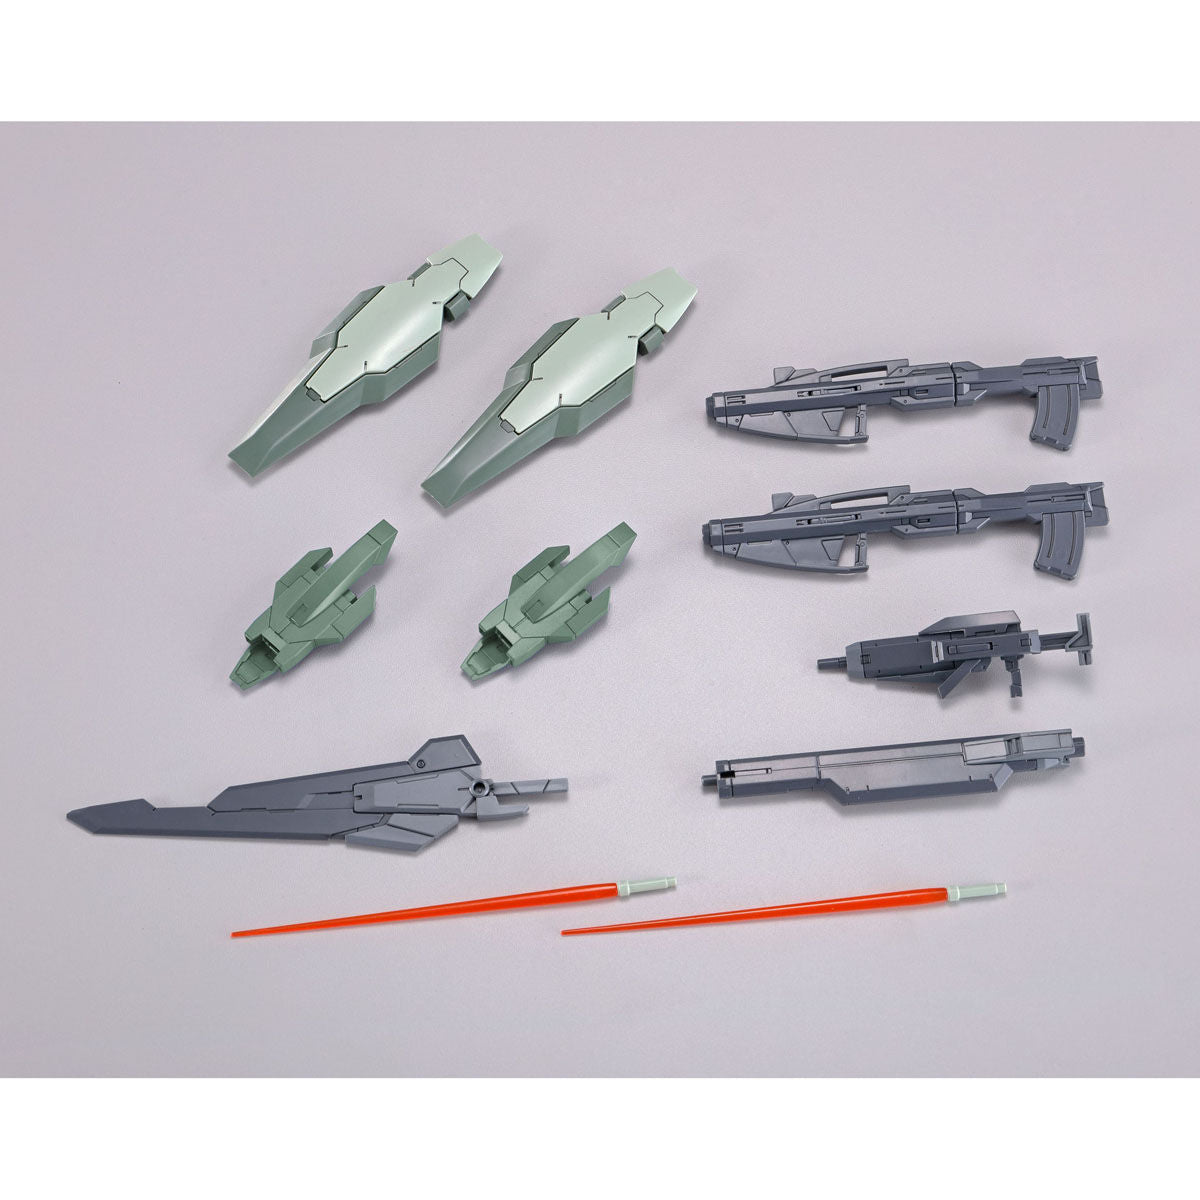 P-BANDAI: HG 1/144 GN-X IV MASS PRODUCTION TYPE [End of February 2020]